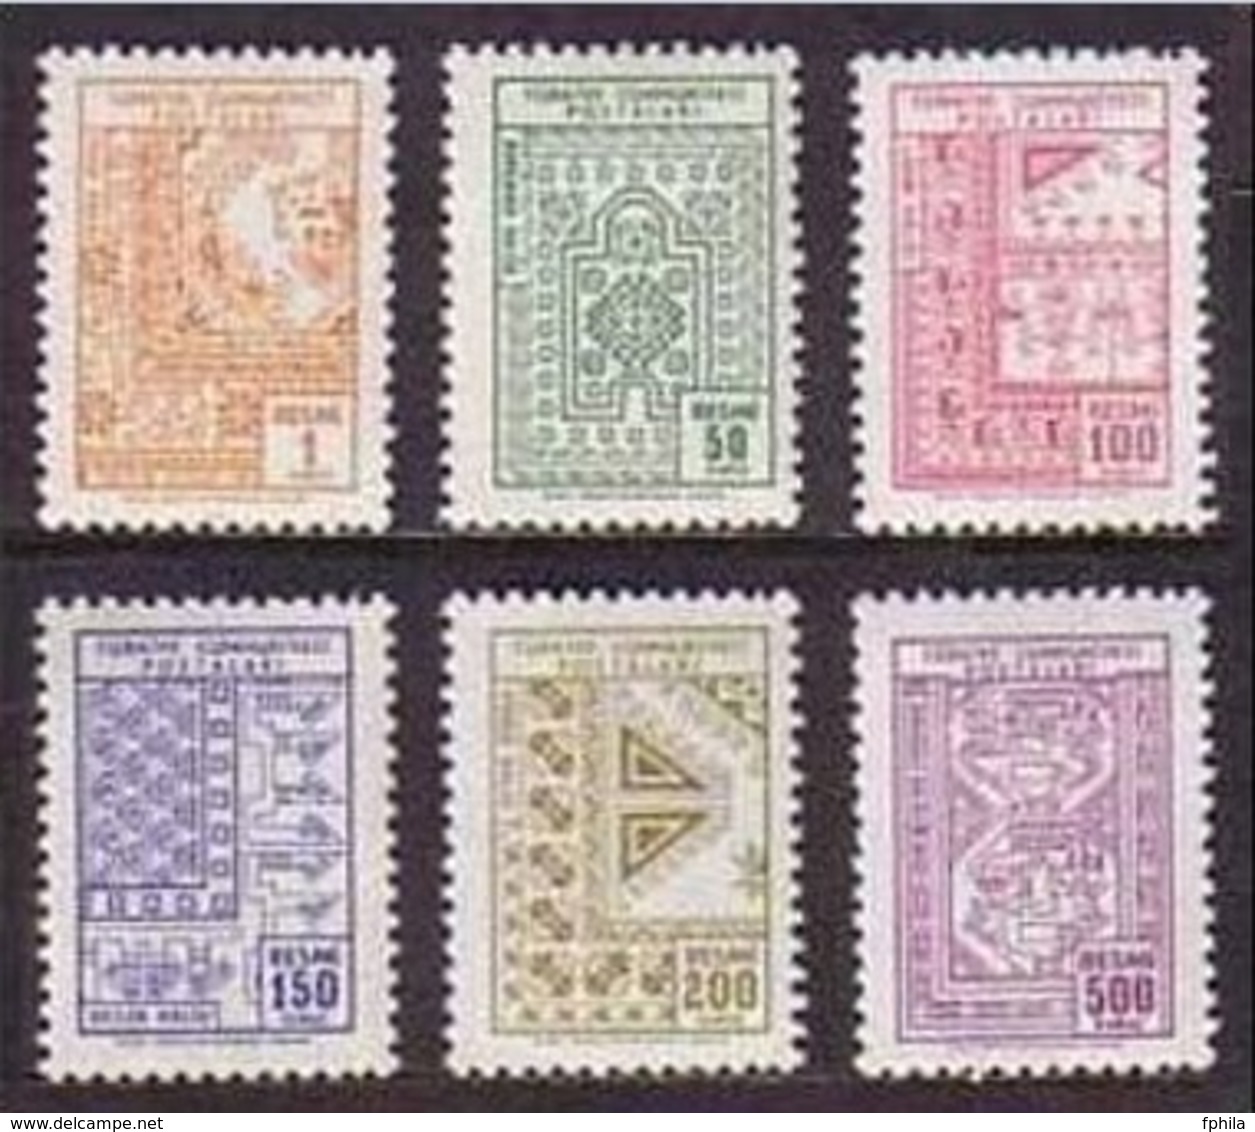 1966 TURKEY OFFICIAL STAMPS MNH ** - Timbres De Service